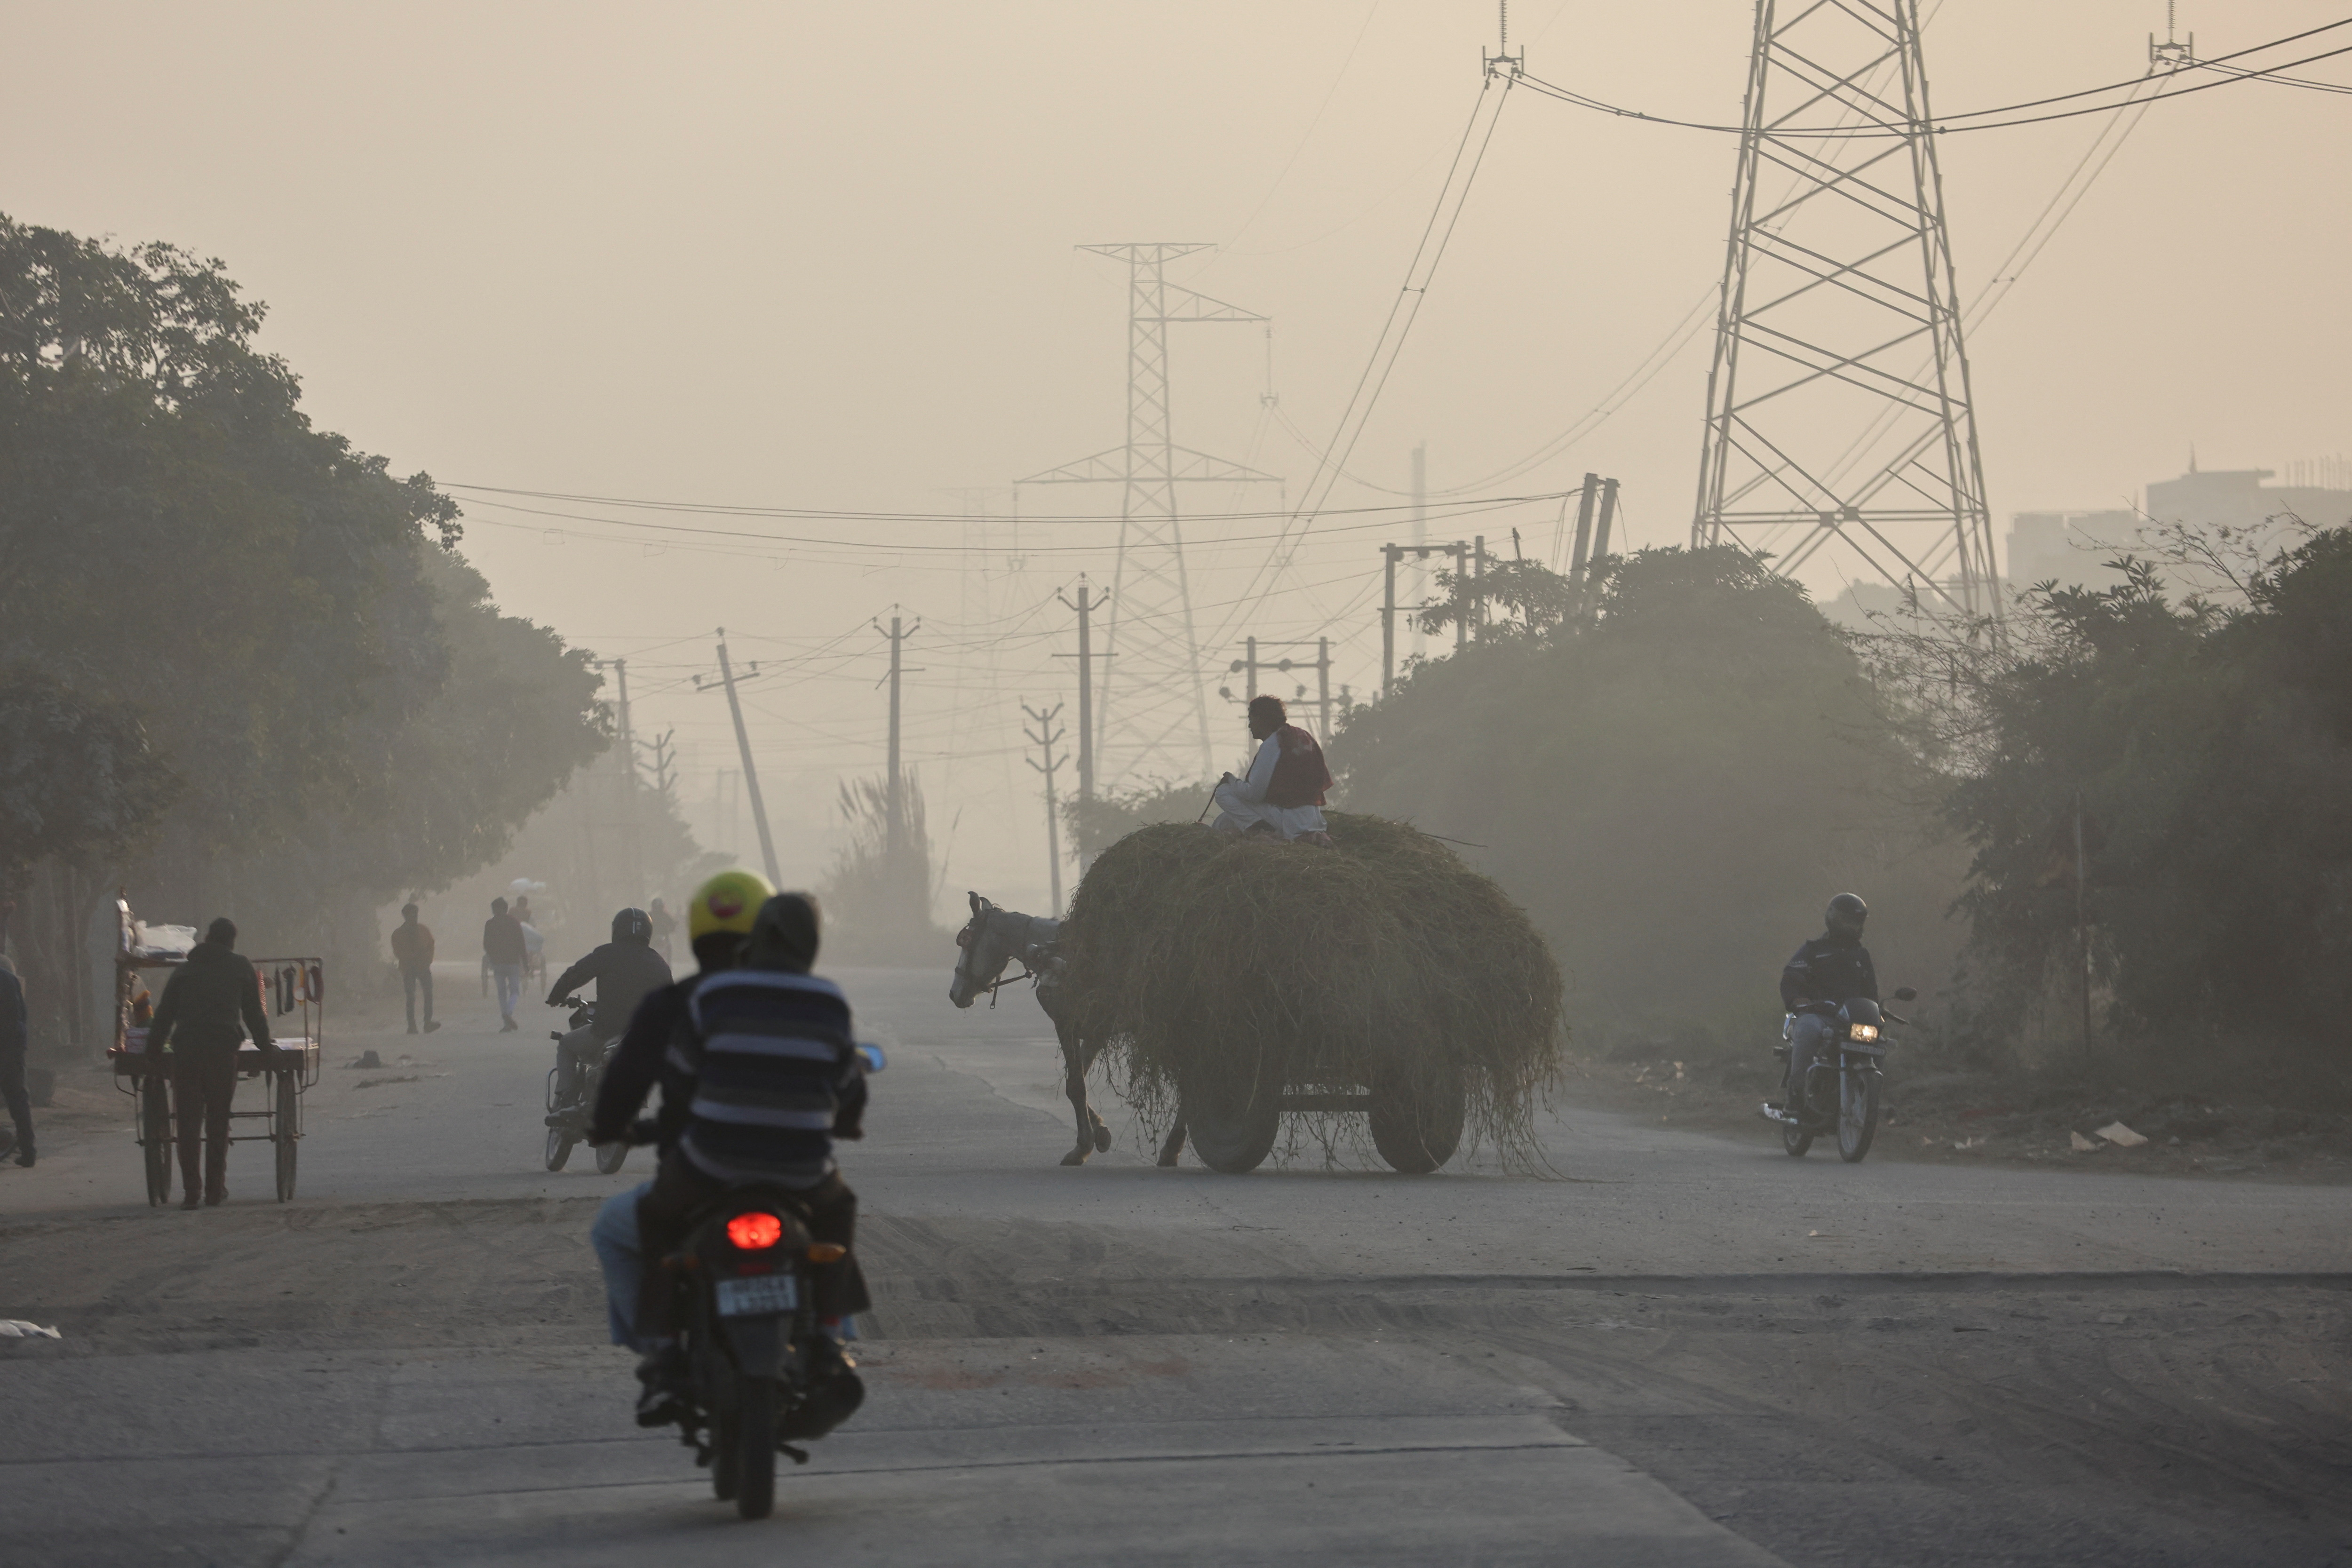 A horse cart crosses a road near dyeing units in Panipat